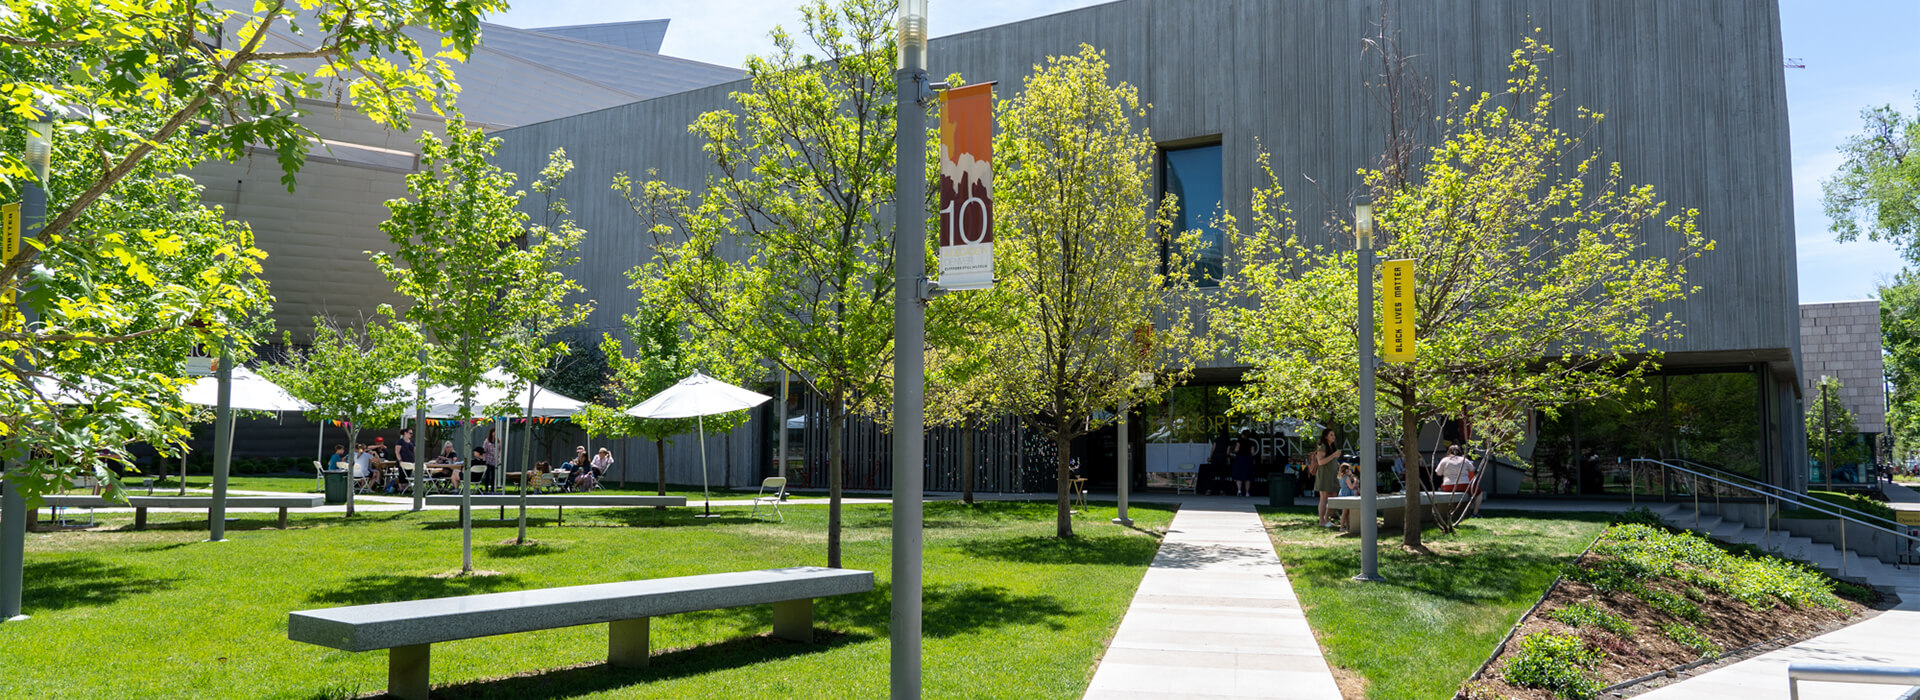 Photo of a sidewalk path in front of the Clyfford Still Museum with green grass and trees